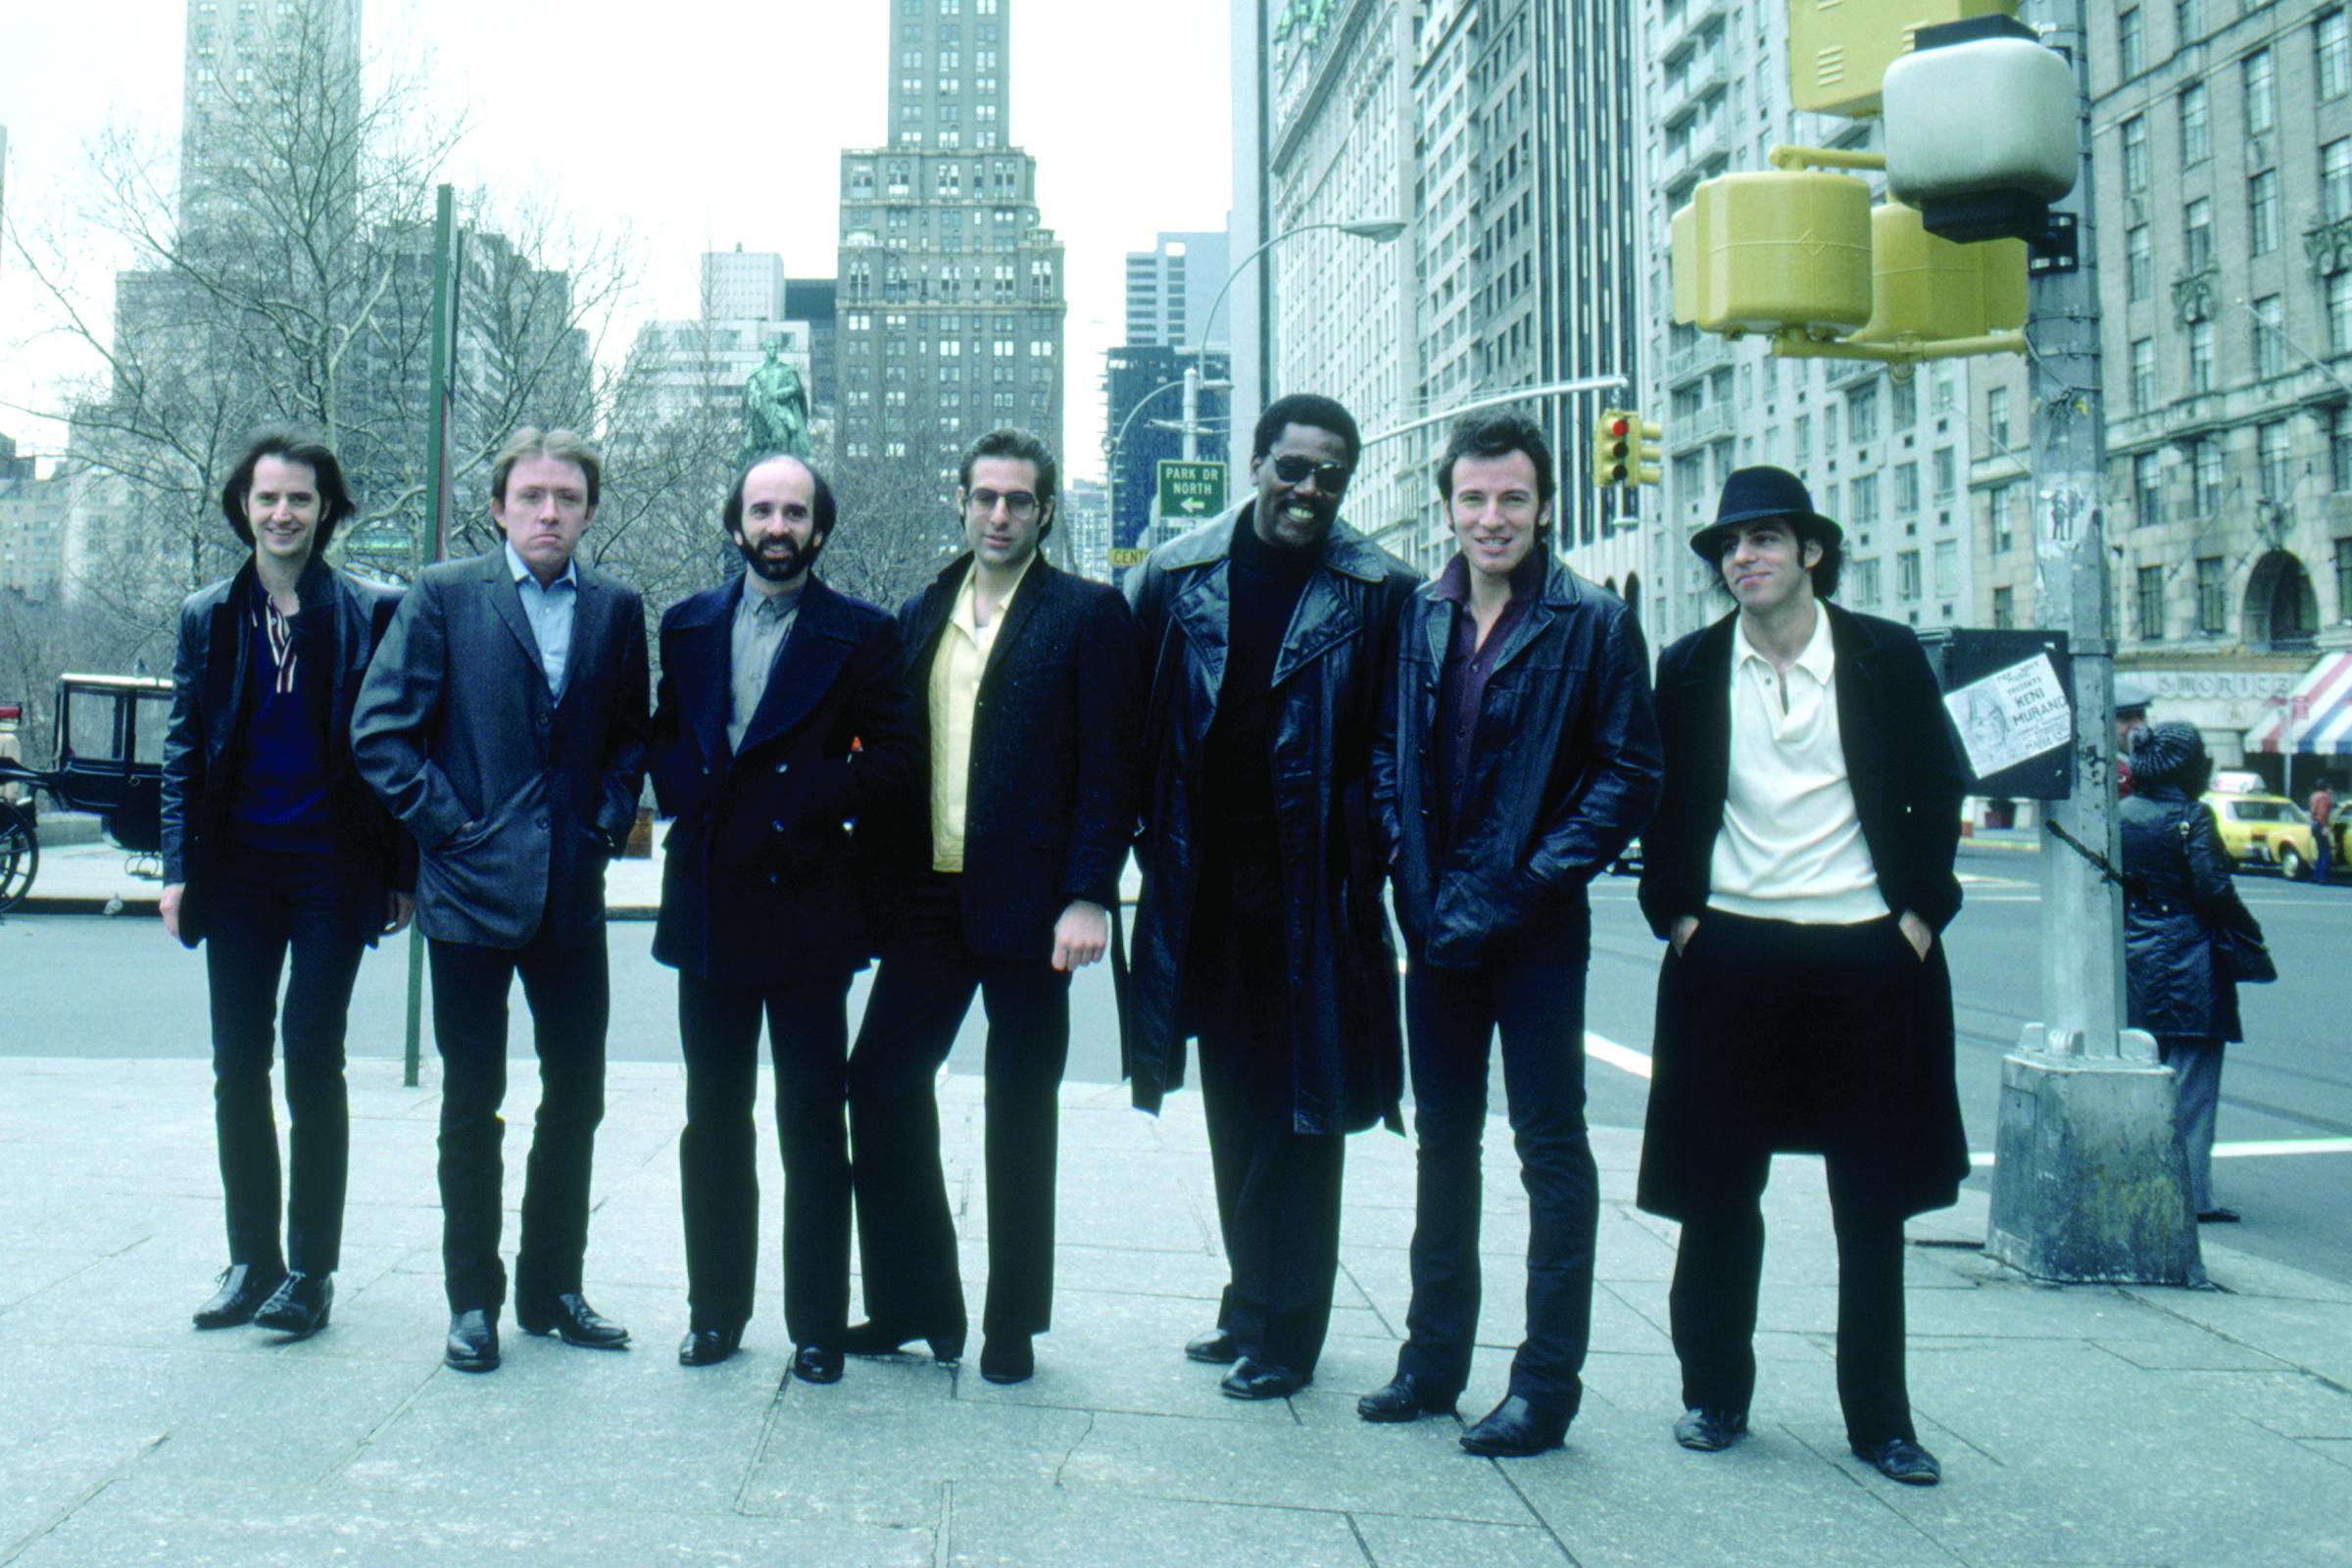 Bruce Springsteen and the E Street Band are seen near Central Park in New York City in March 1980.